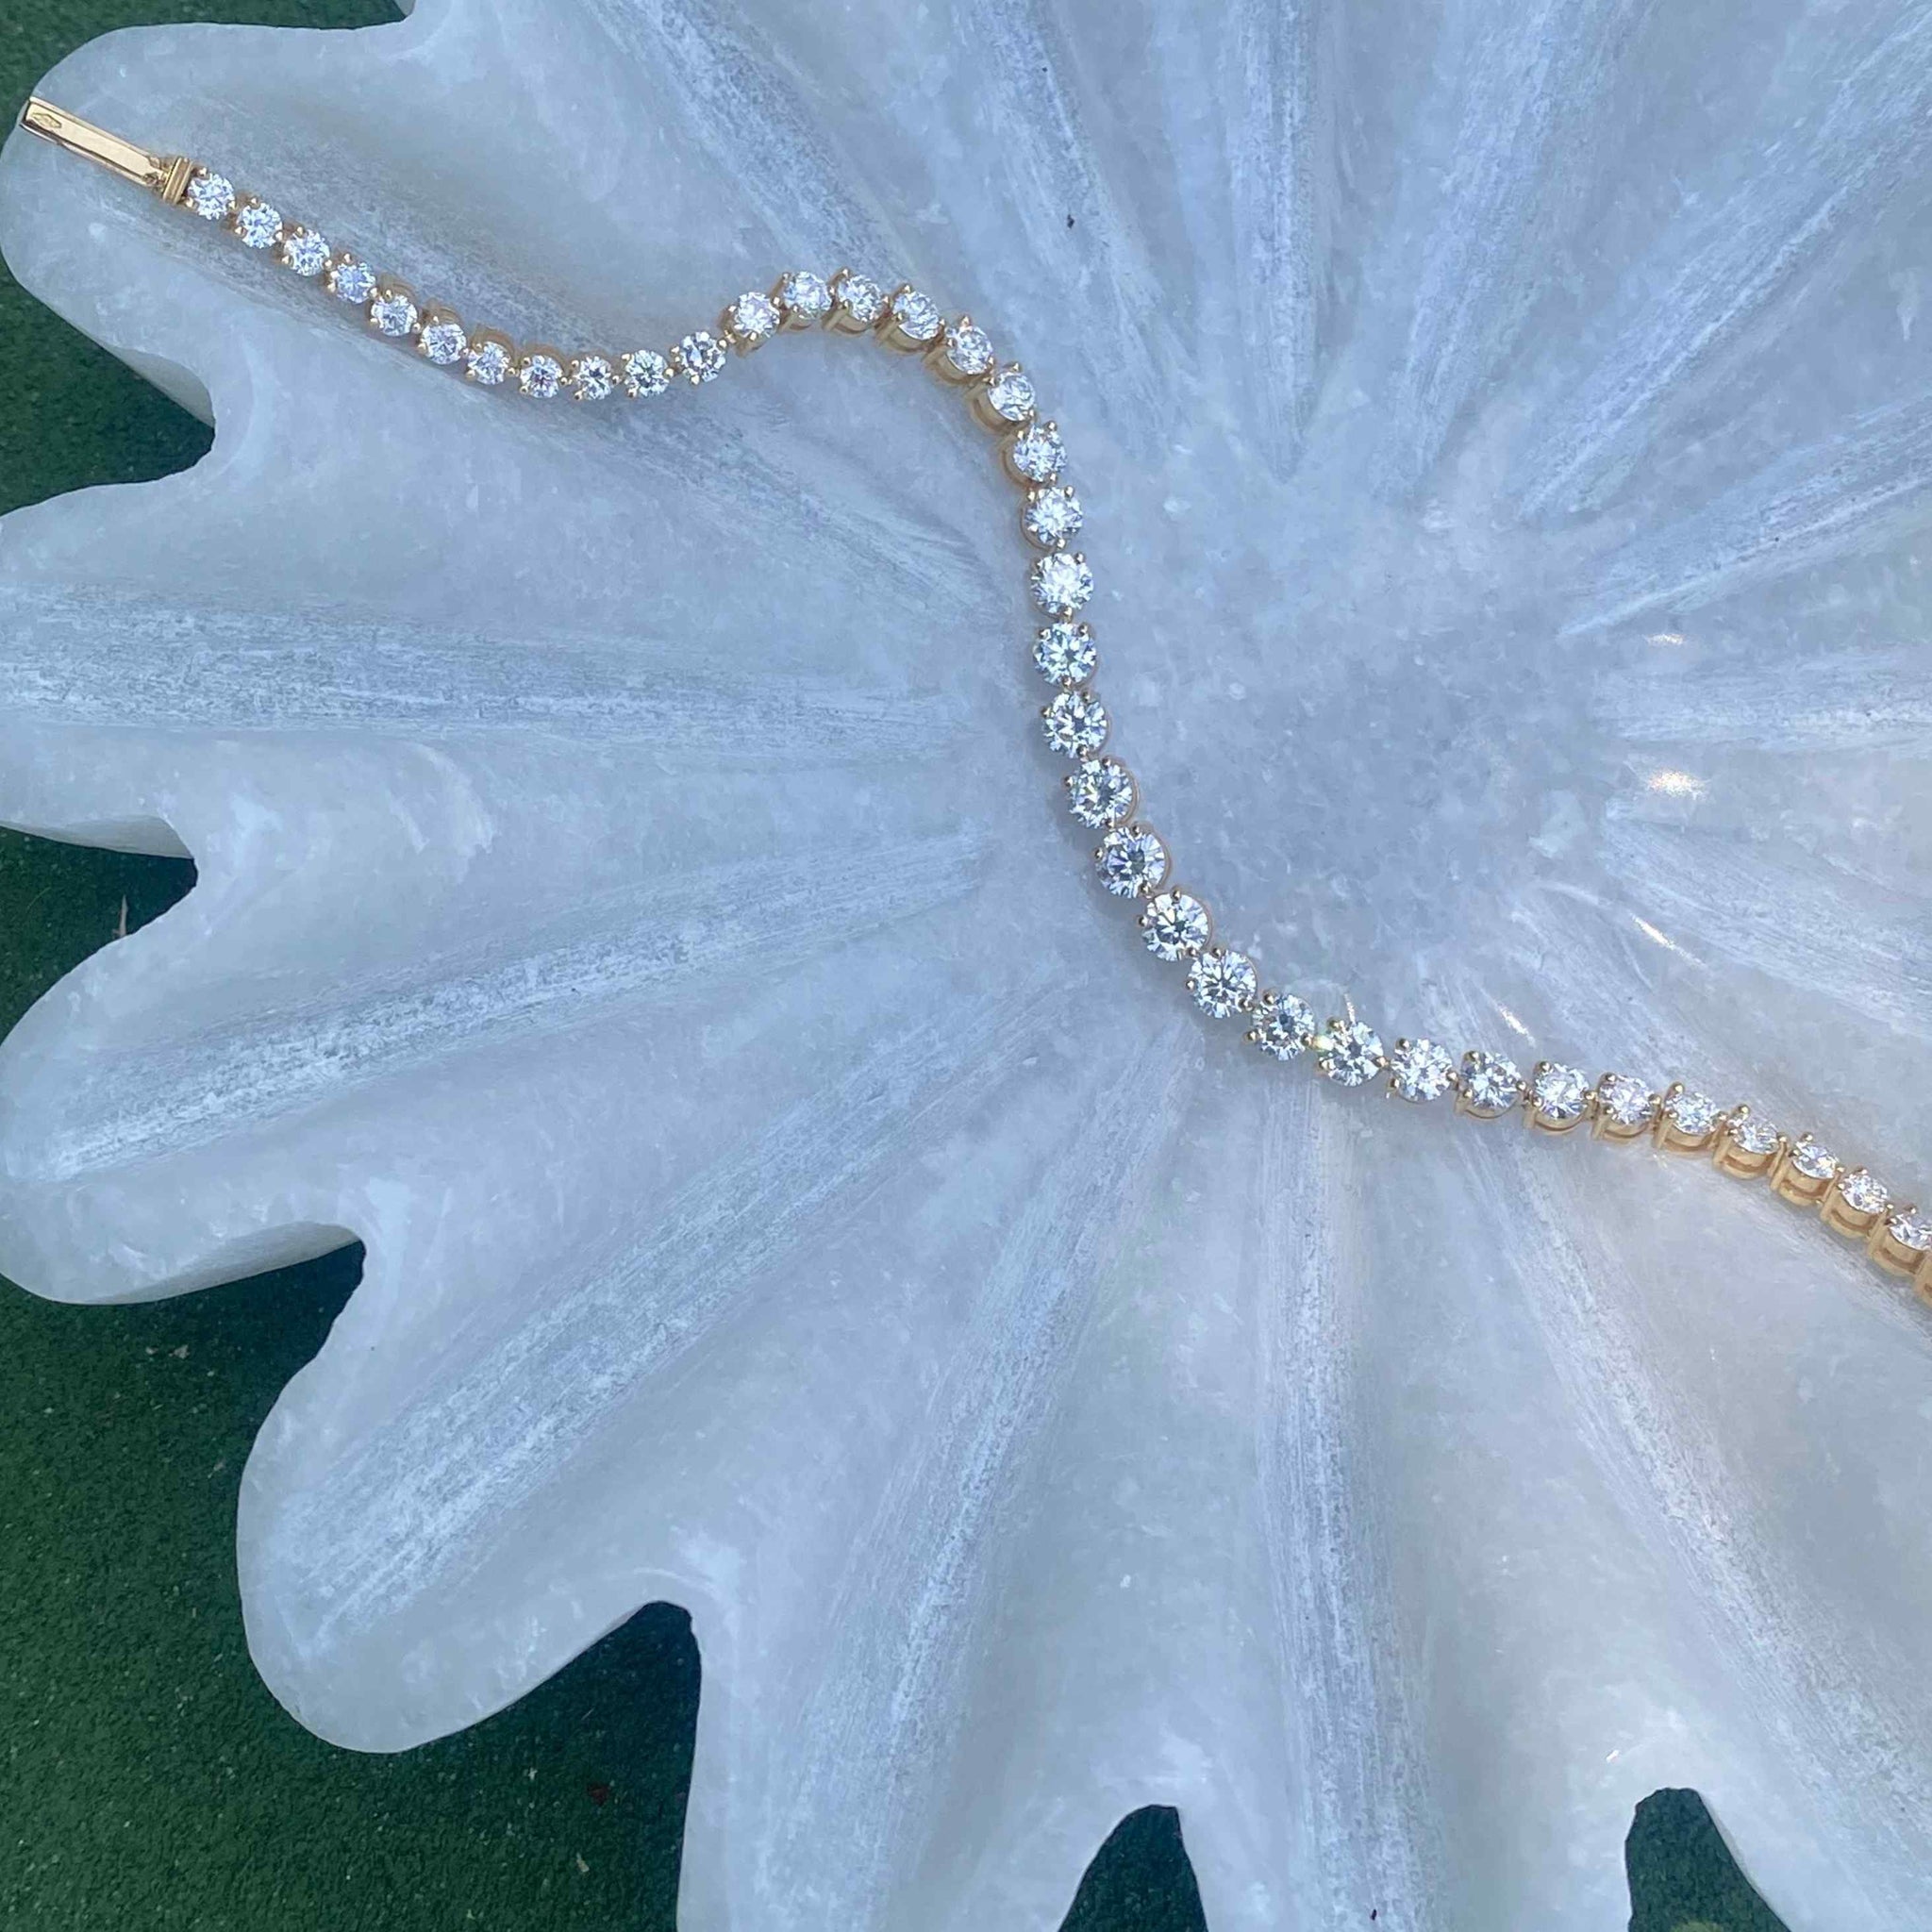 This graduated tennis bracelet features round brilliants in a three-prong solitaire setting of 18K Yellow Gold. 6 total carat weight, with a center stone carat weight of 0.25, each diamond is hand-set in an open basket setting to allow maximum light play on the D color, IF/VVS clarity diamonds.